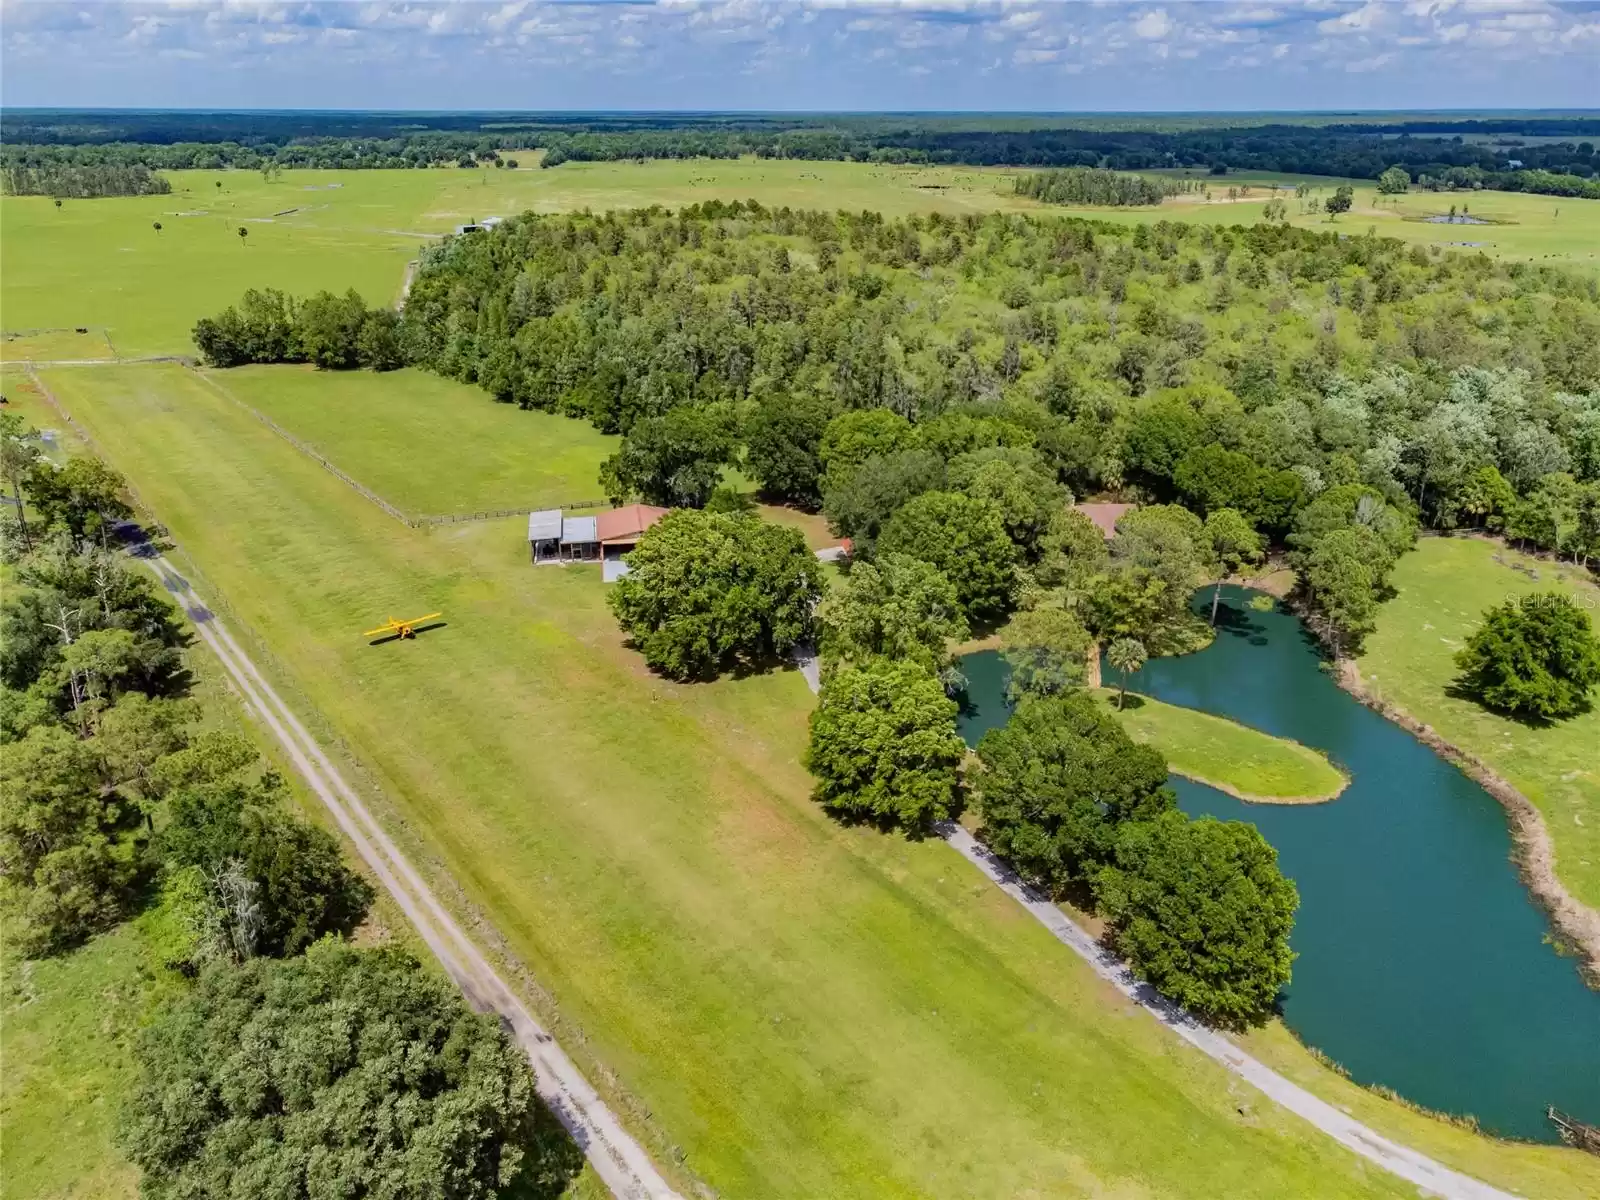 Fenced completely around the perimeter of the property, enjoy the privacy of your own Florida home with a registered airport.